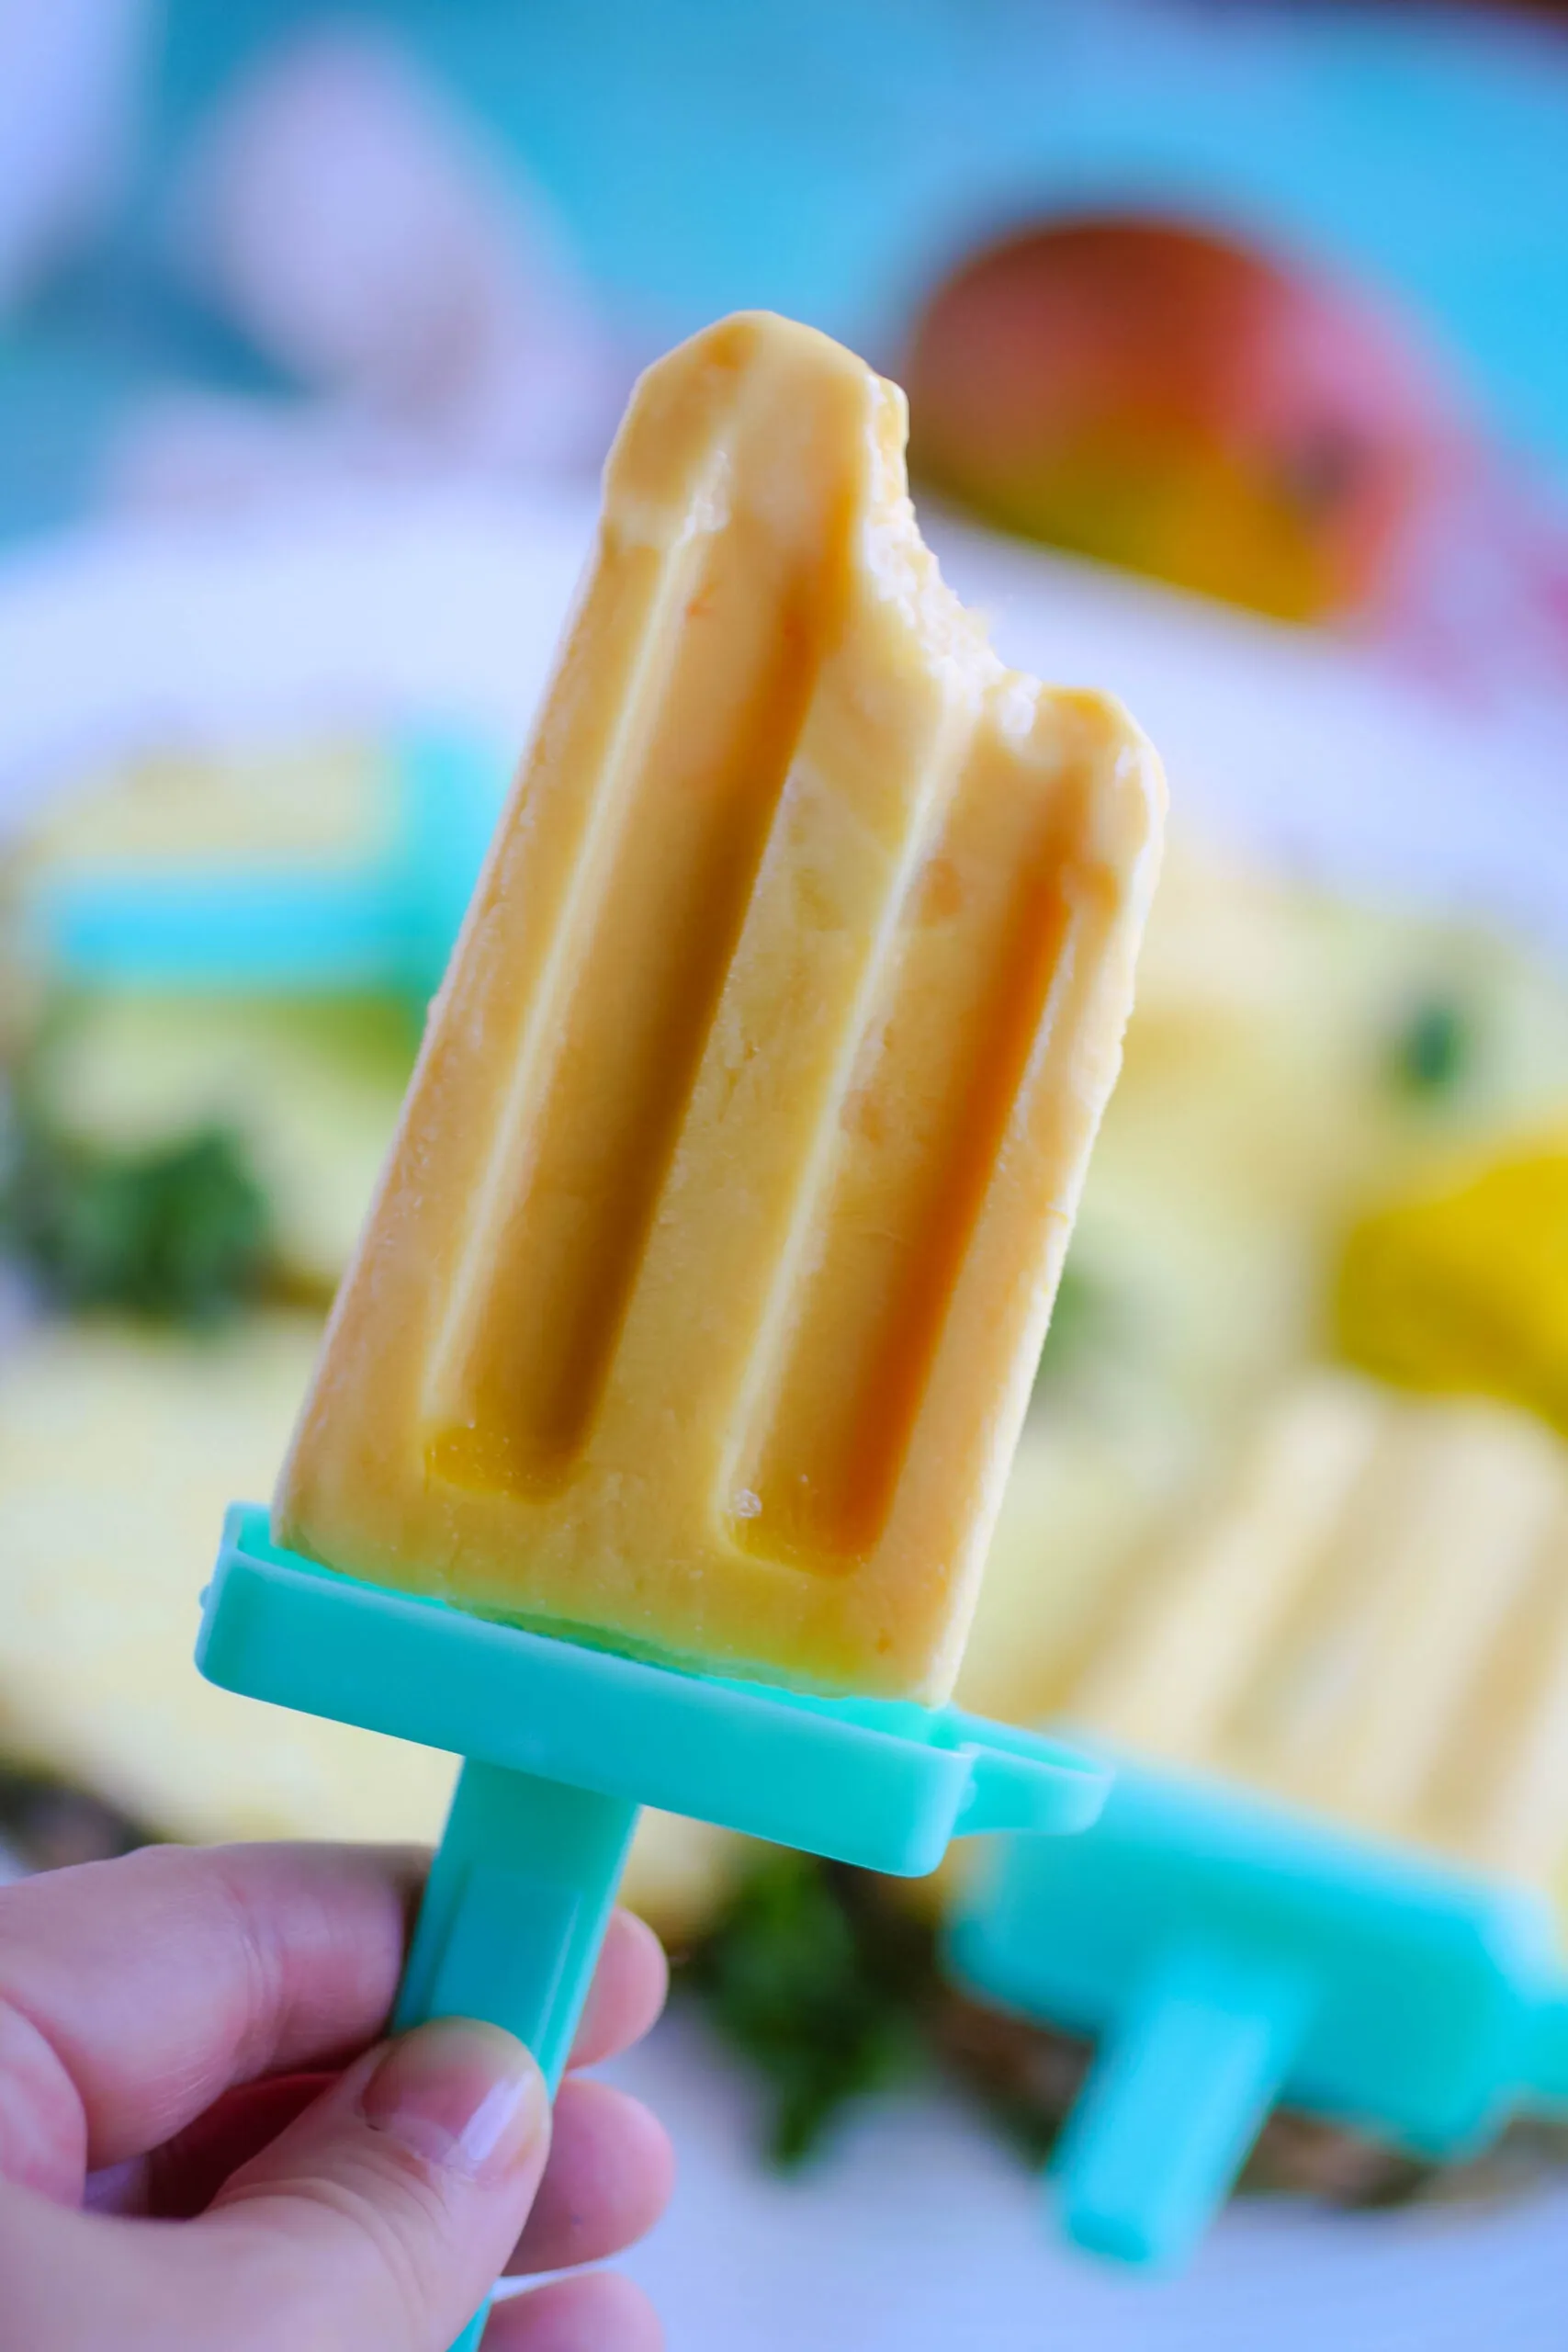 Mango-Pineapple Creamsicles help take the edge off the summer heat, with big flavor!